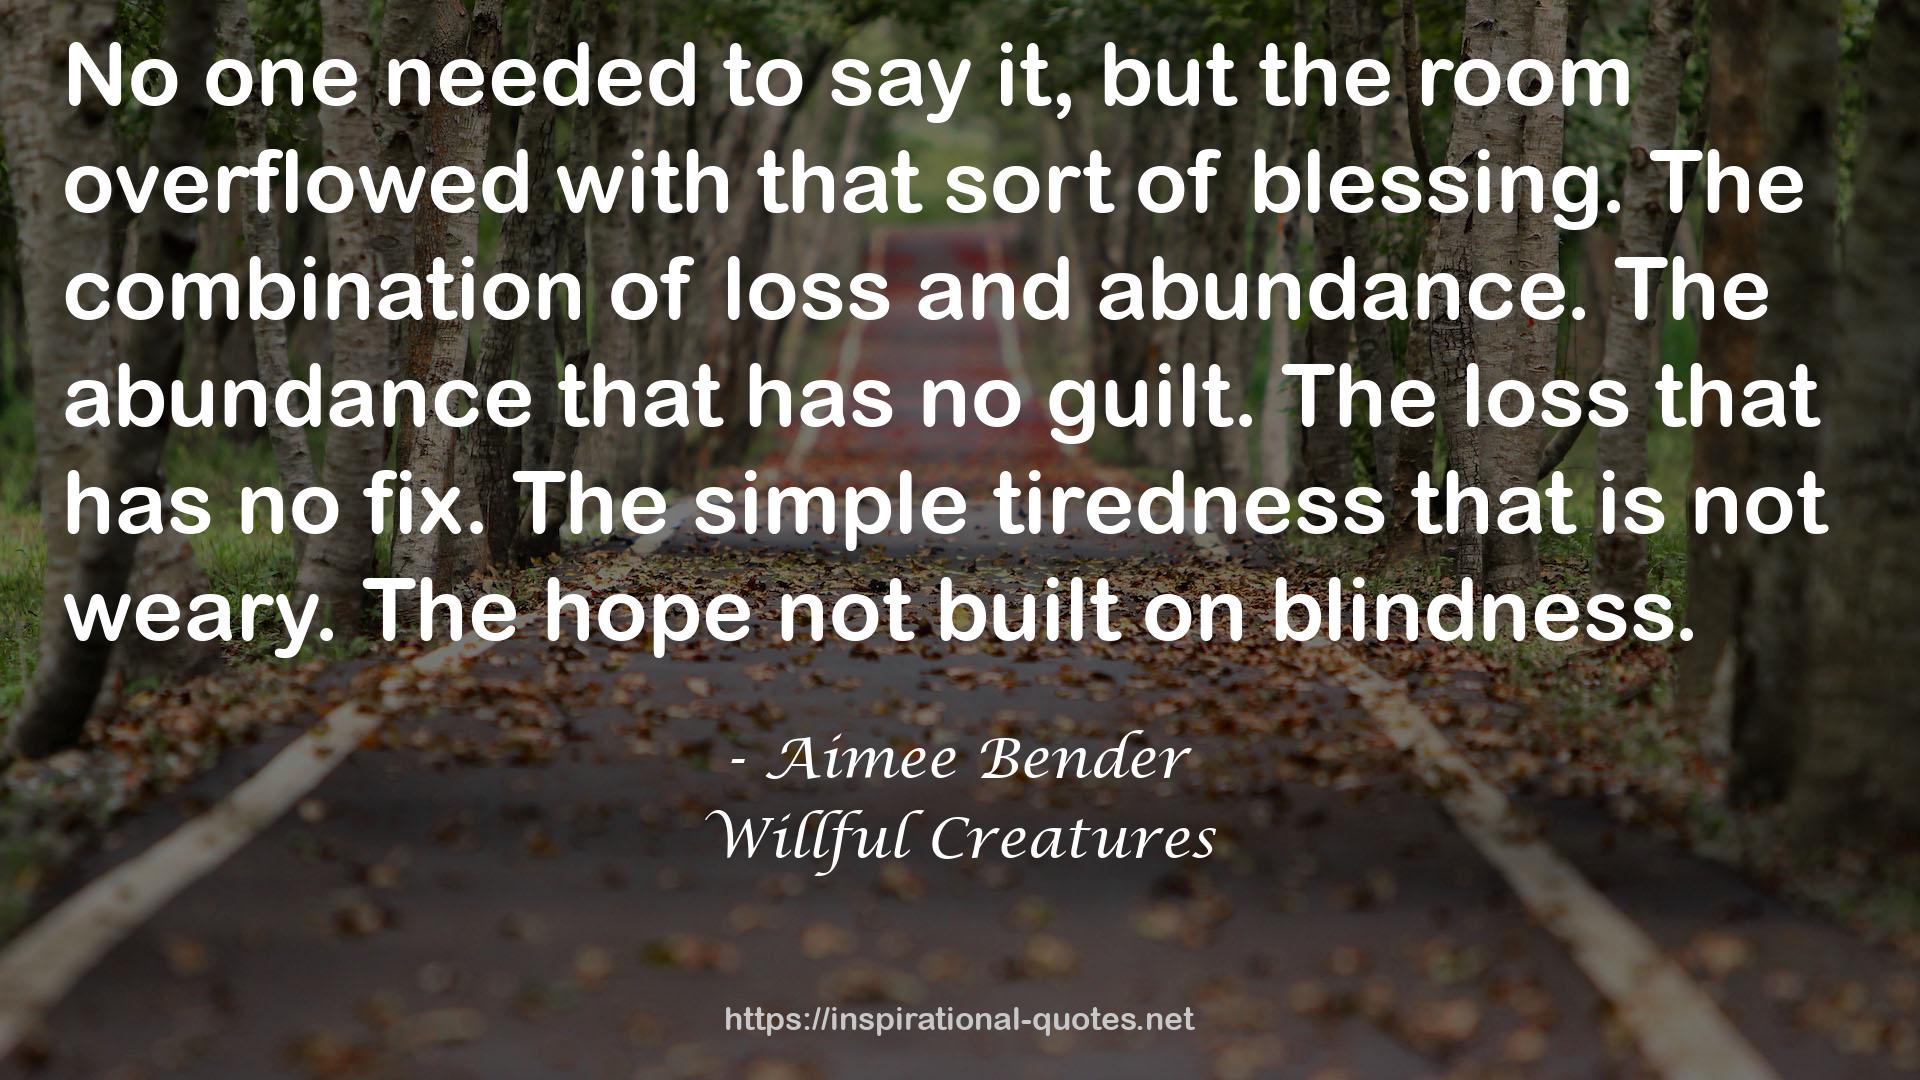 Willful Creatures QUOTES